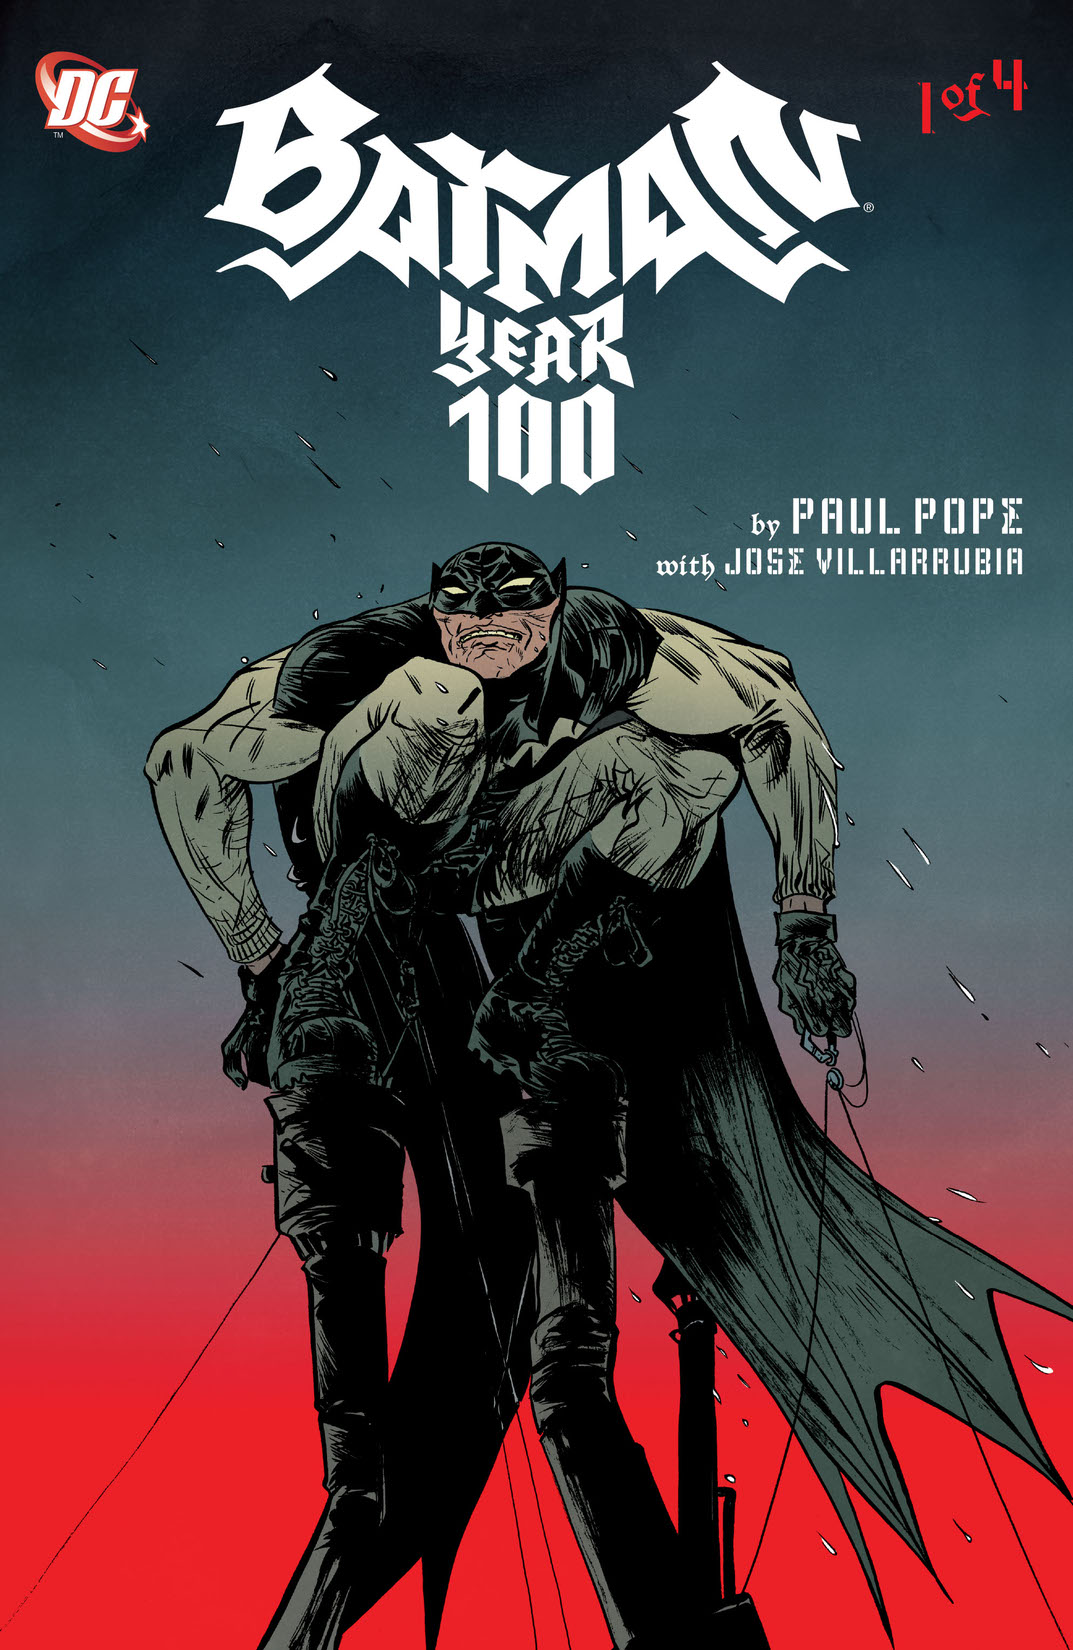 Batman: Year 100 #1 preview images